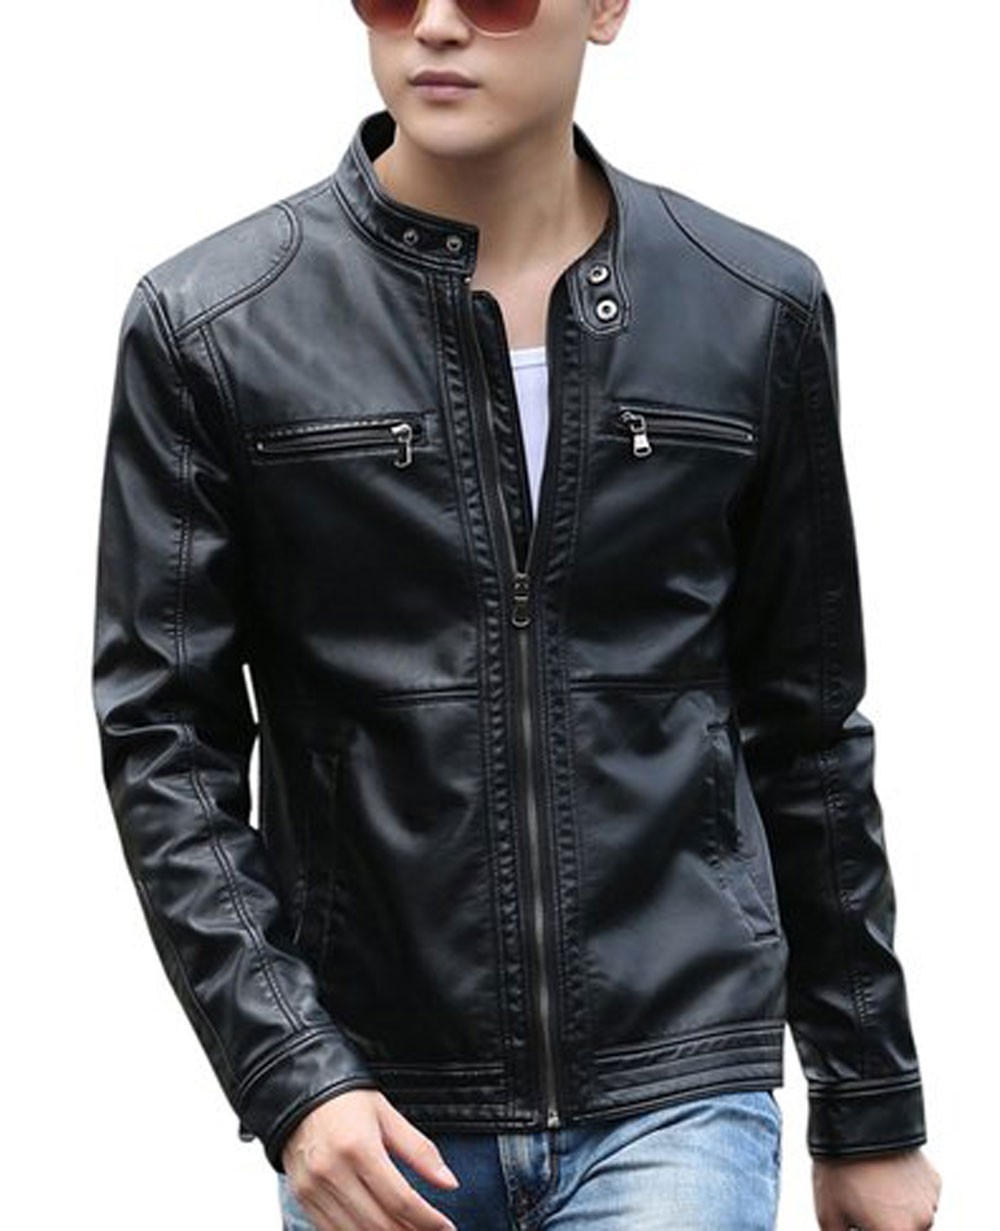 Bstge Mens Stand Collar Vintage PU Leather Outwear